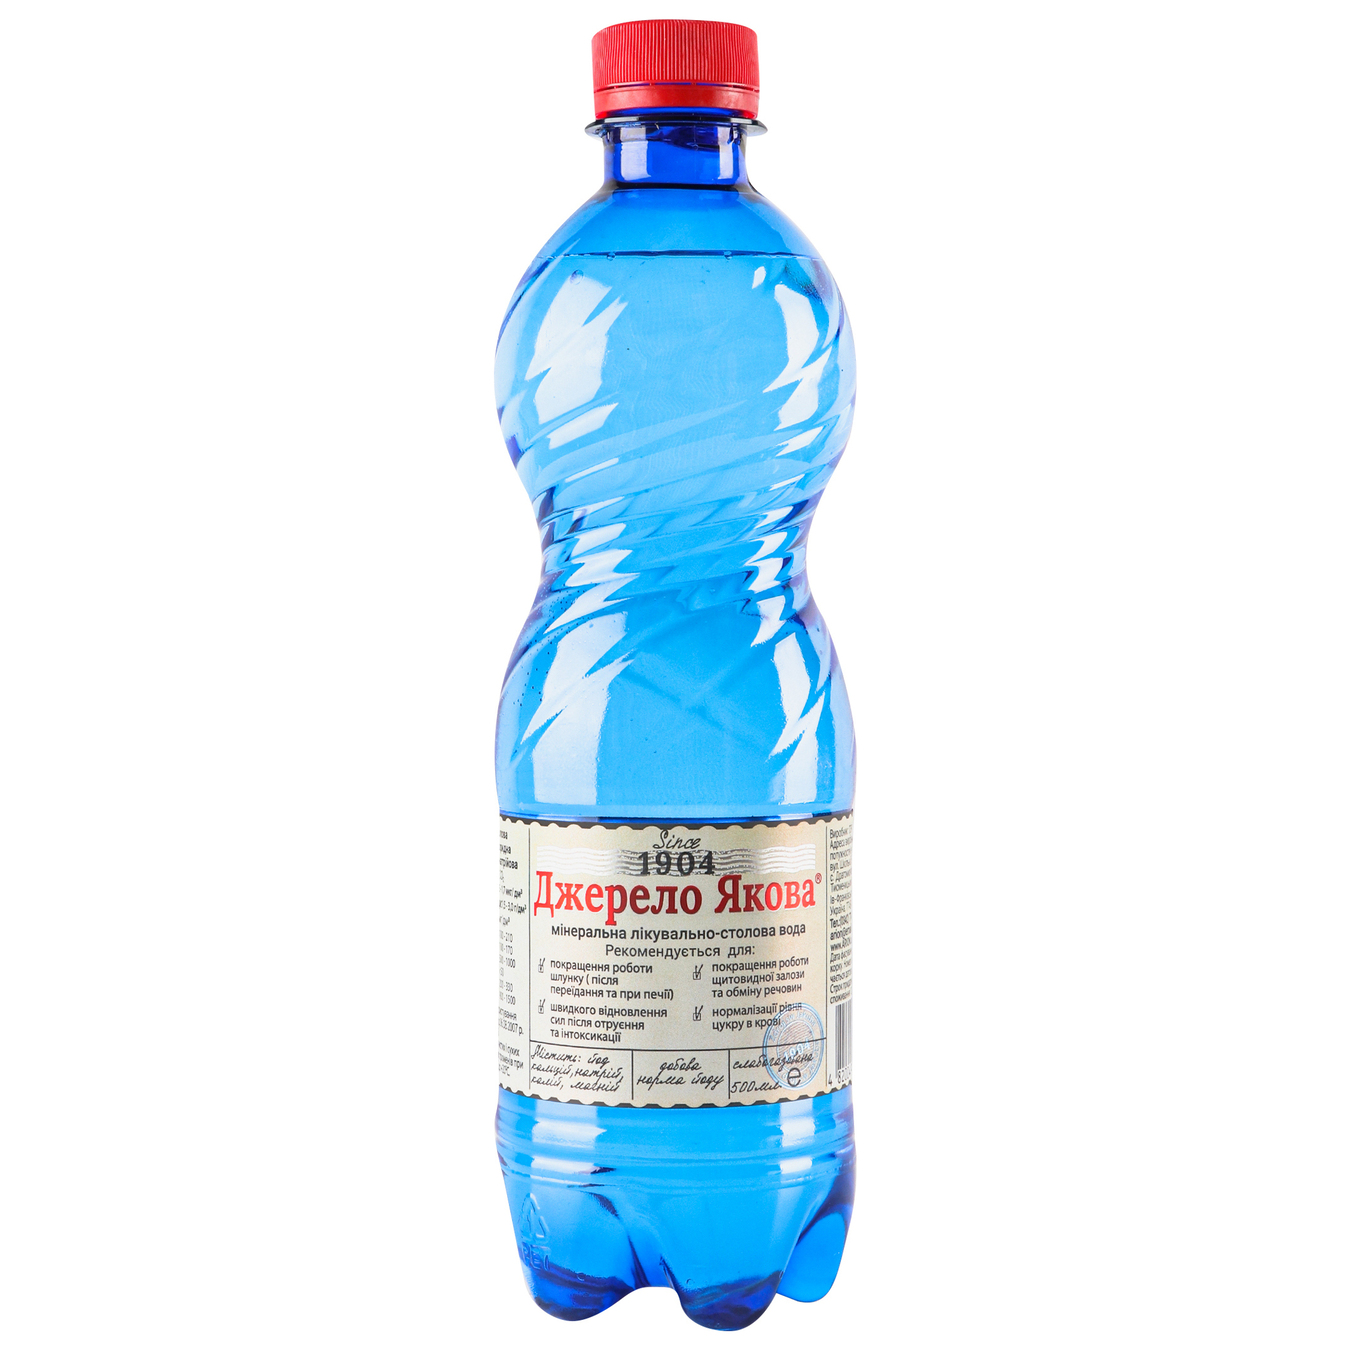 Jacob's Spring mineral water slightly carbonated 0.5l